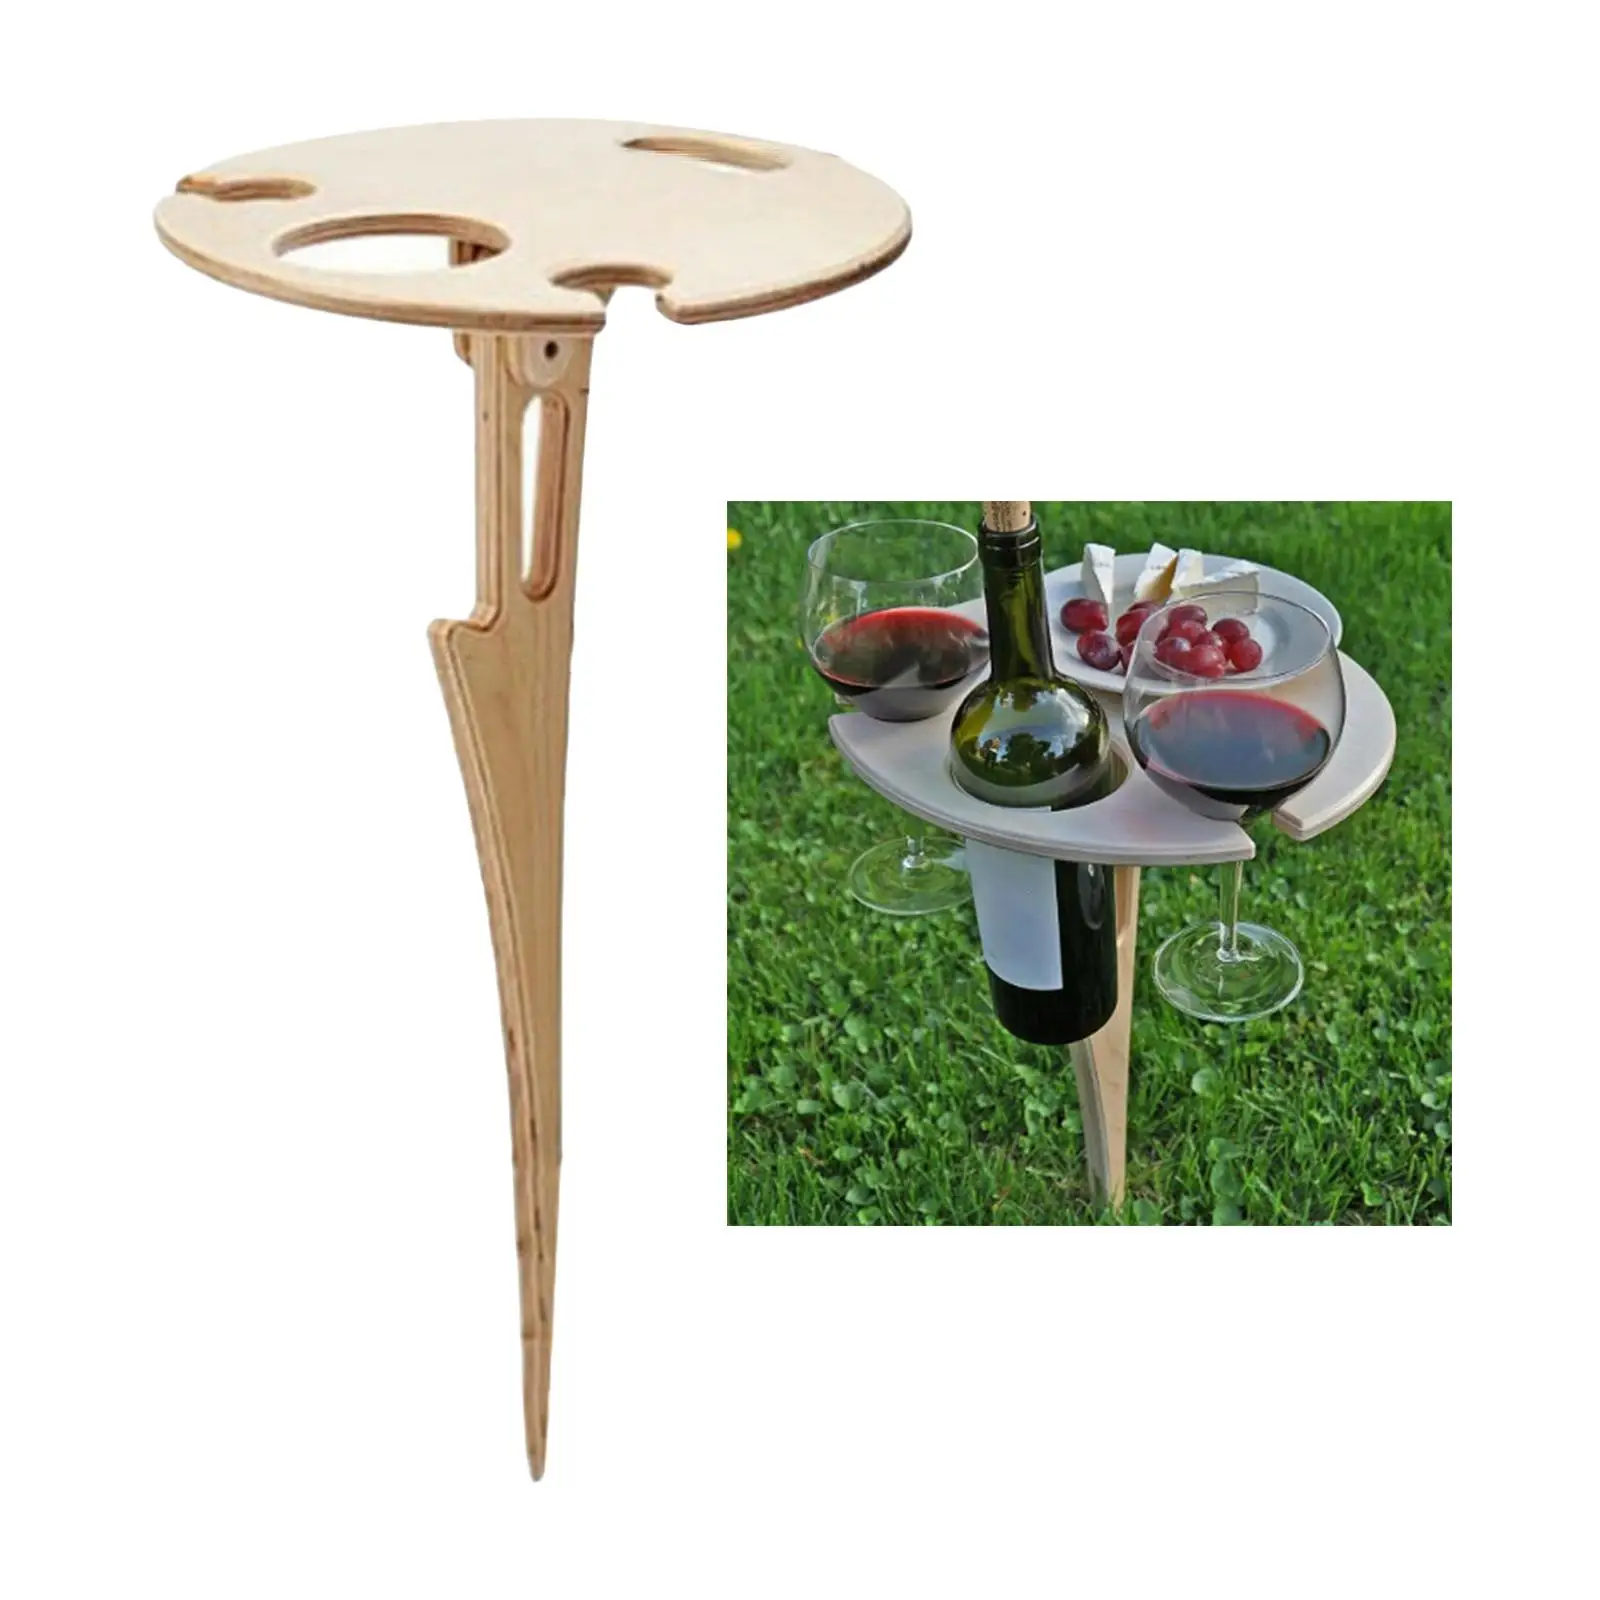 Outdoor Table Camping Trip Glass Holder 30x20cm Garden Lawn Snack